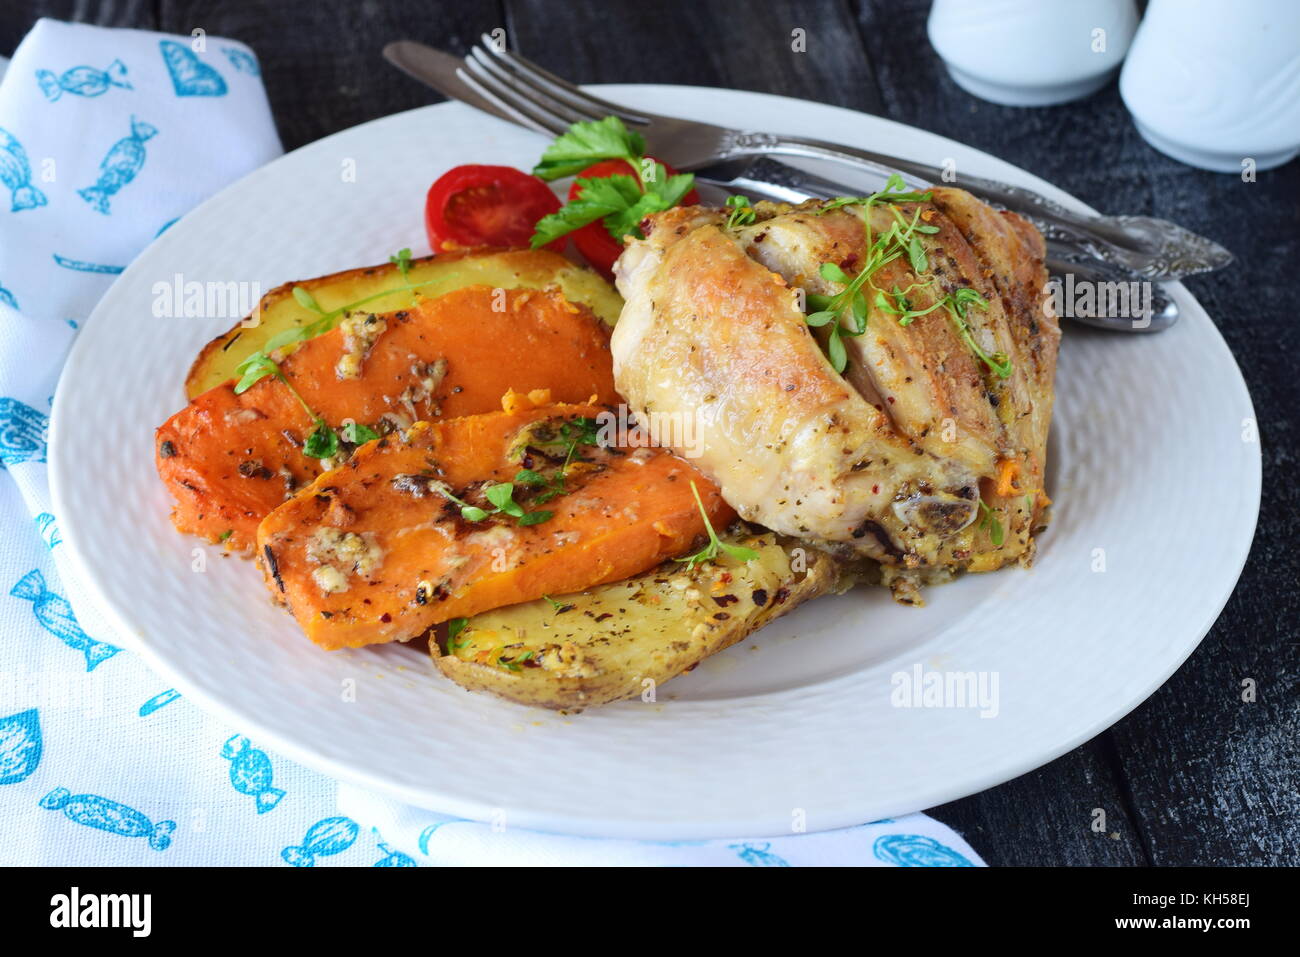 Oven cooked chicken with potato and sweet potato, spices , herbs in olive oil. Home cooking, healthy food concept Stock Photo